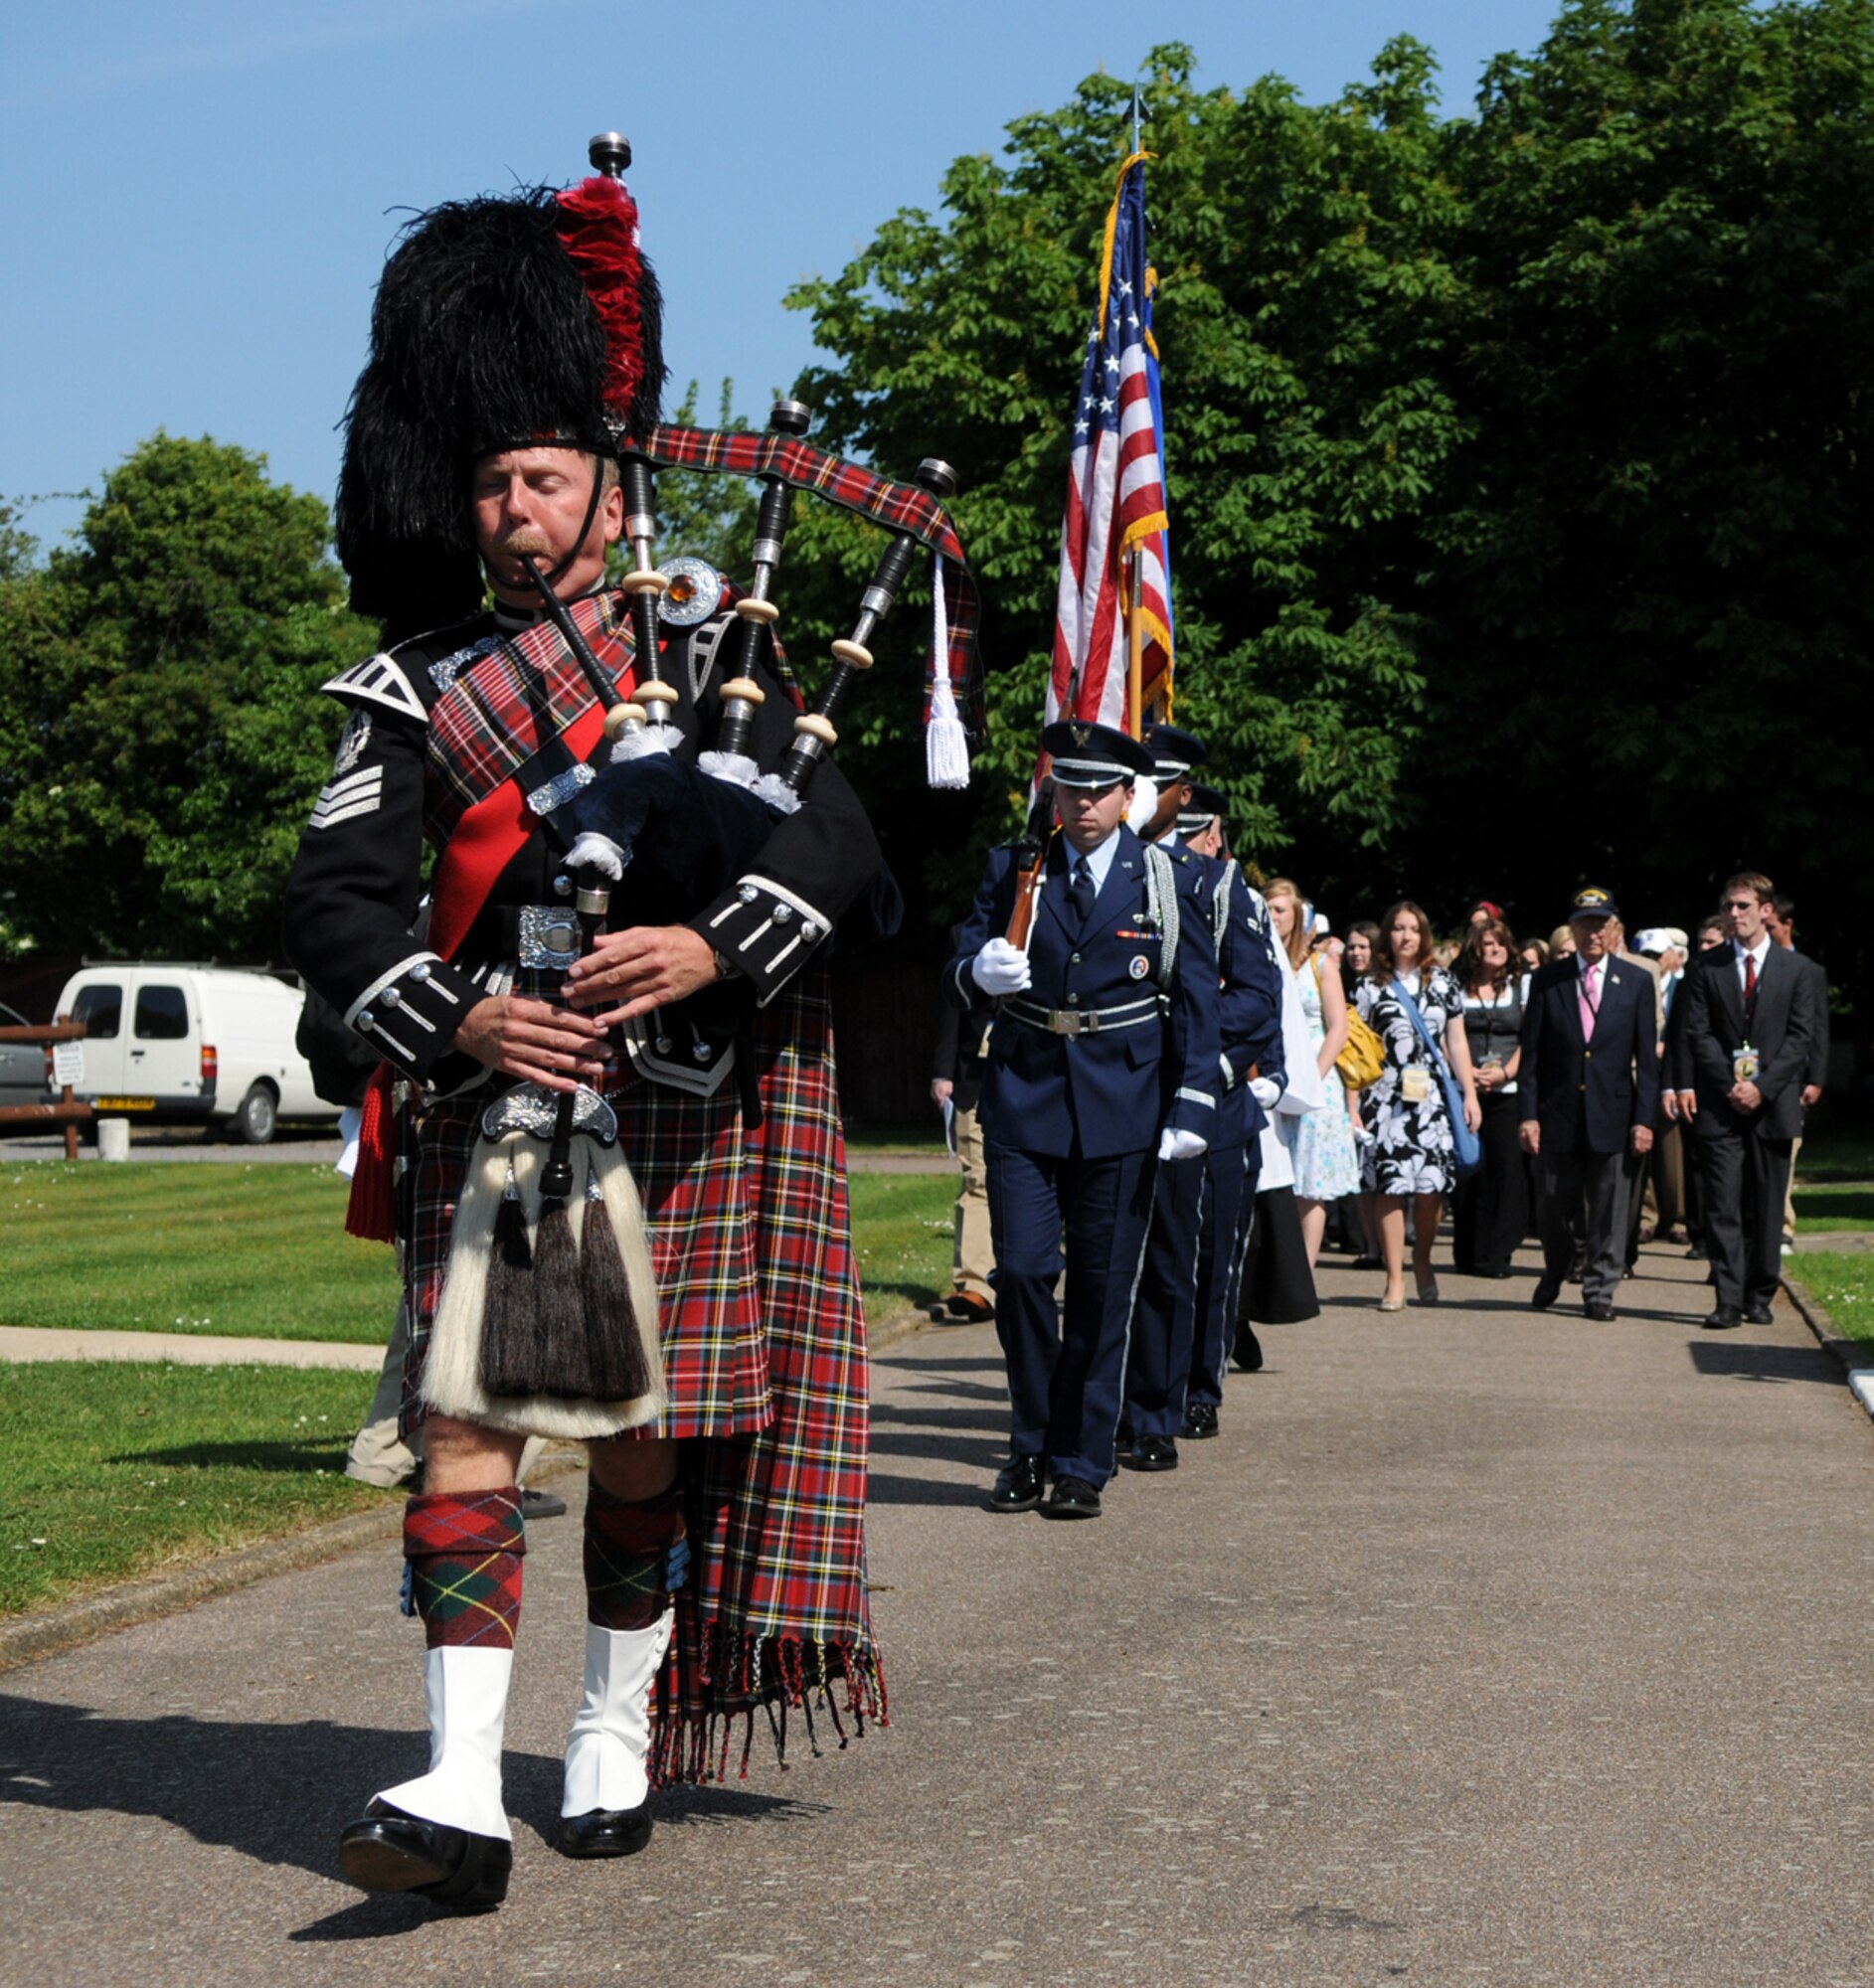 Bagpiper Dave Harper, followed by the RAF Mildenhall Honor Guard, leads a precession of World War II veterans, students and faculty members from Missouri’s College of the Ozarks to a ceremony at Thorpe Abbots, the former home of the 100th Bomb Group.  The group was in England on a tour of historic World War II sites coinciding with the 65th anniversary of the Allied invasion of occupied France.  (U.S. Air Force photo by Staff Sgt. Austin M. May)